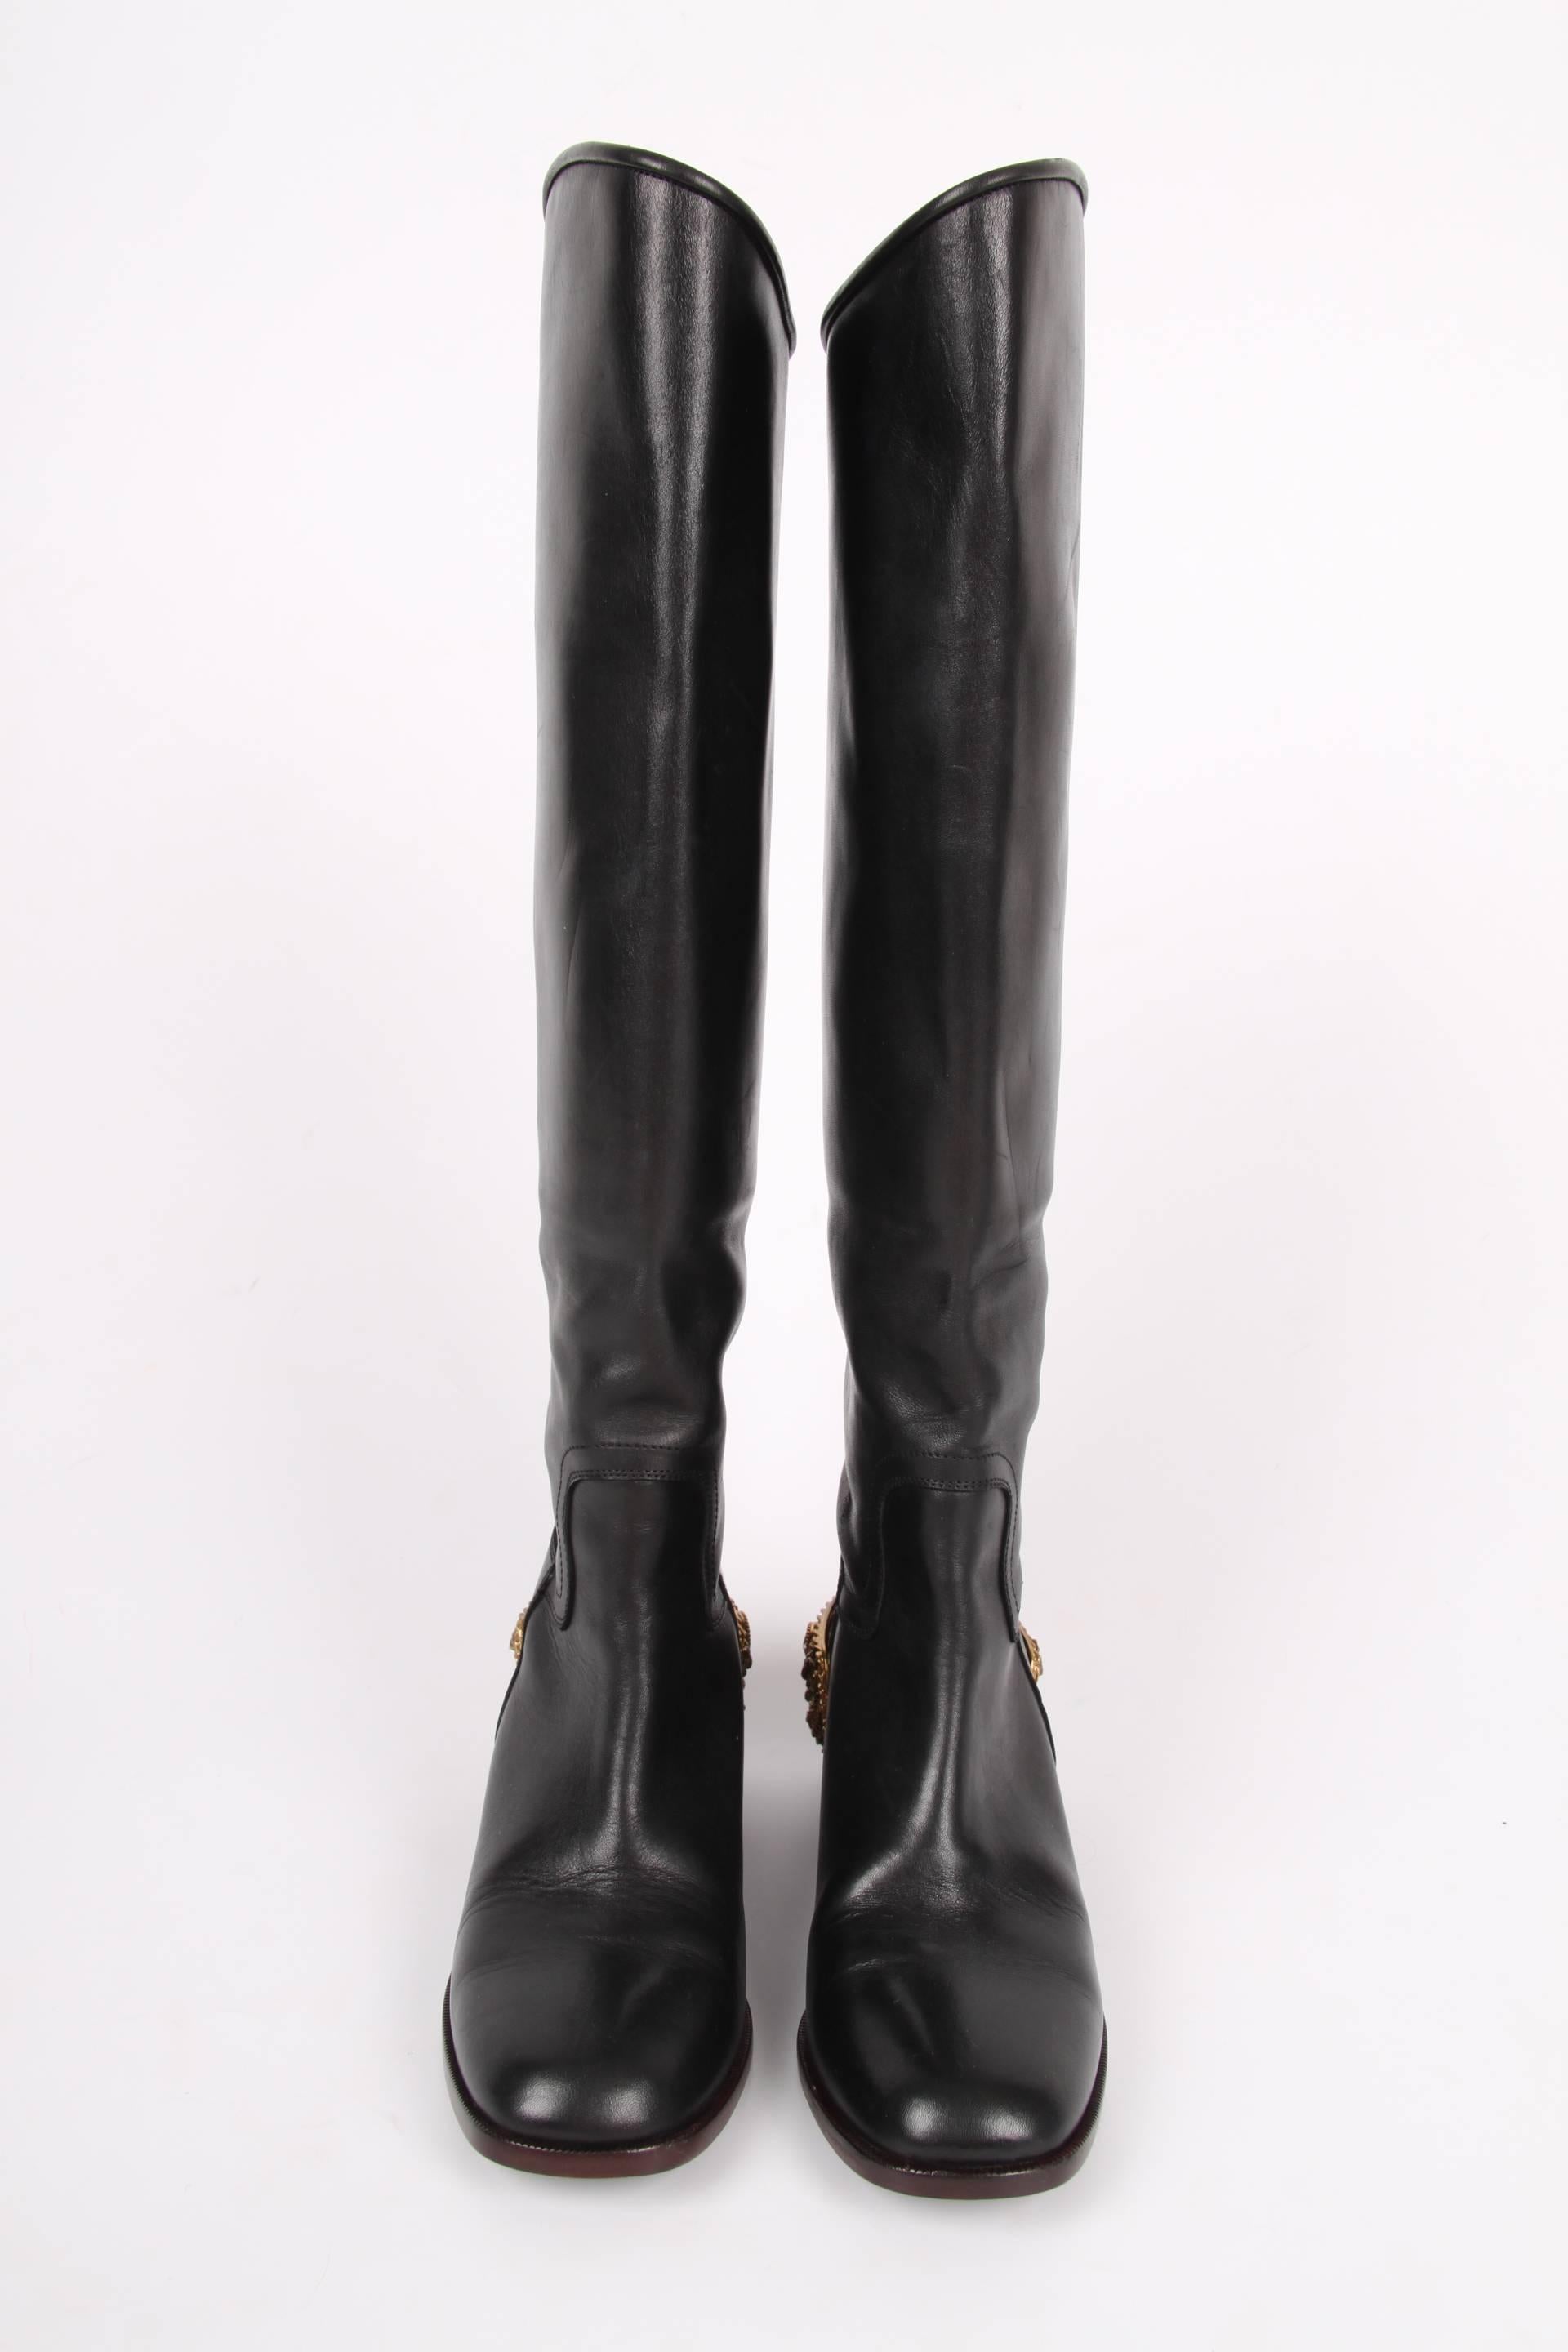 Very rare and amazingly beautiful! Classic black leather riding boots by Chanel from the Paris-Monte Carlo collection with outstanding spurs on the heel.

A sturdy heel that measures 5 centimeters, a round toe. The narrow shaft has no zipper and has